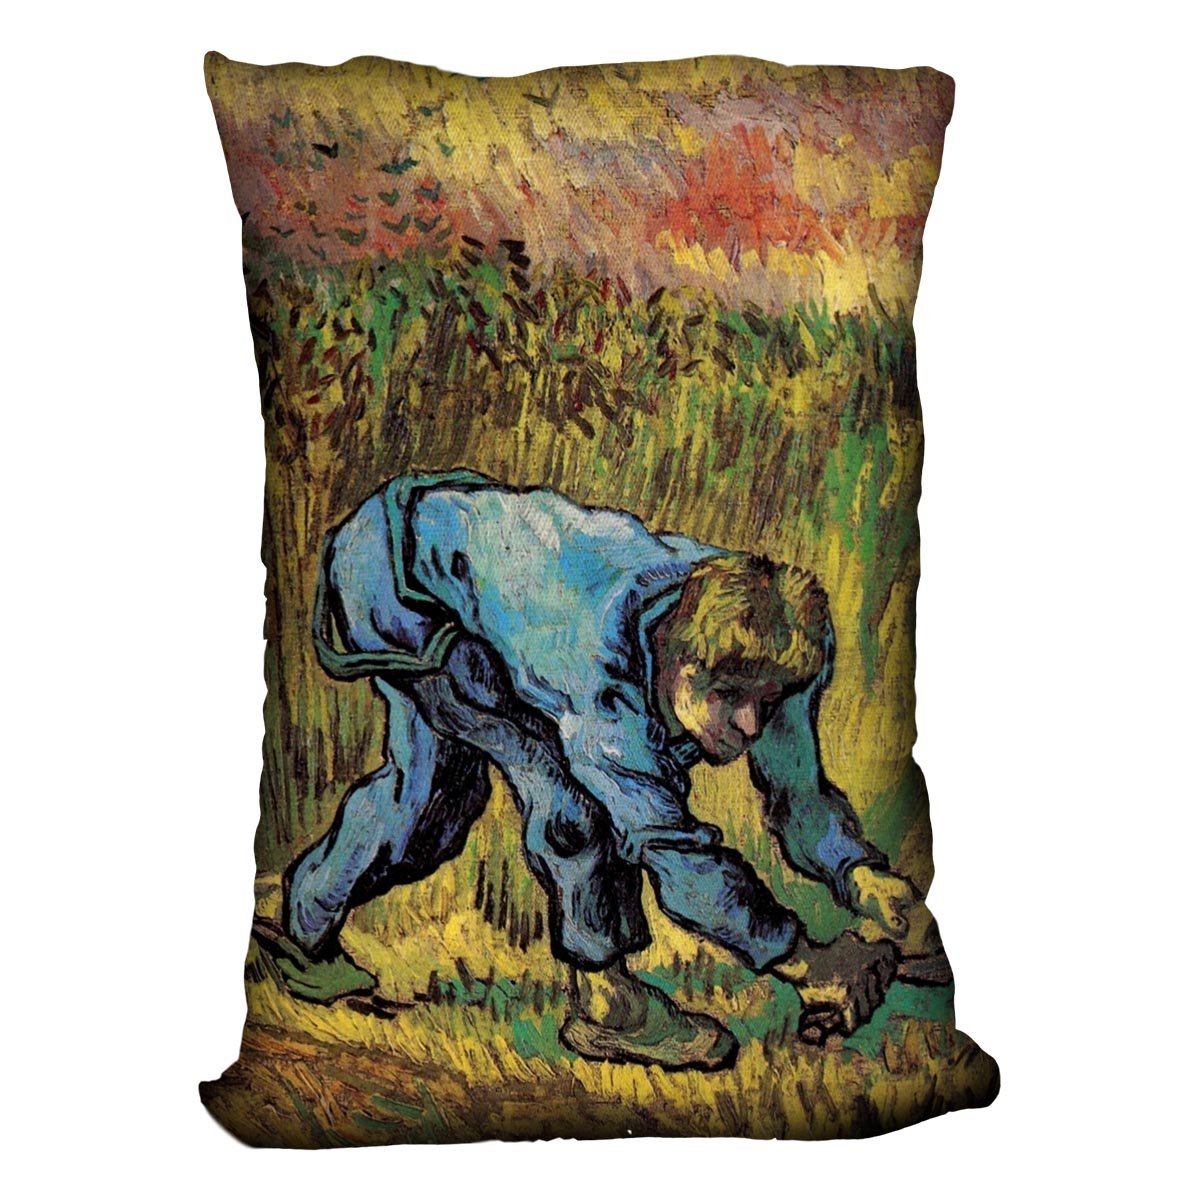 Reaper with Sickle after Millet by Van Gogh Throw Pillow